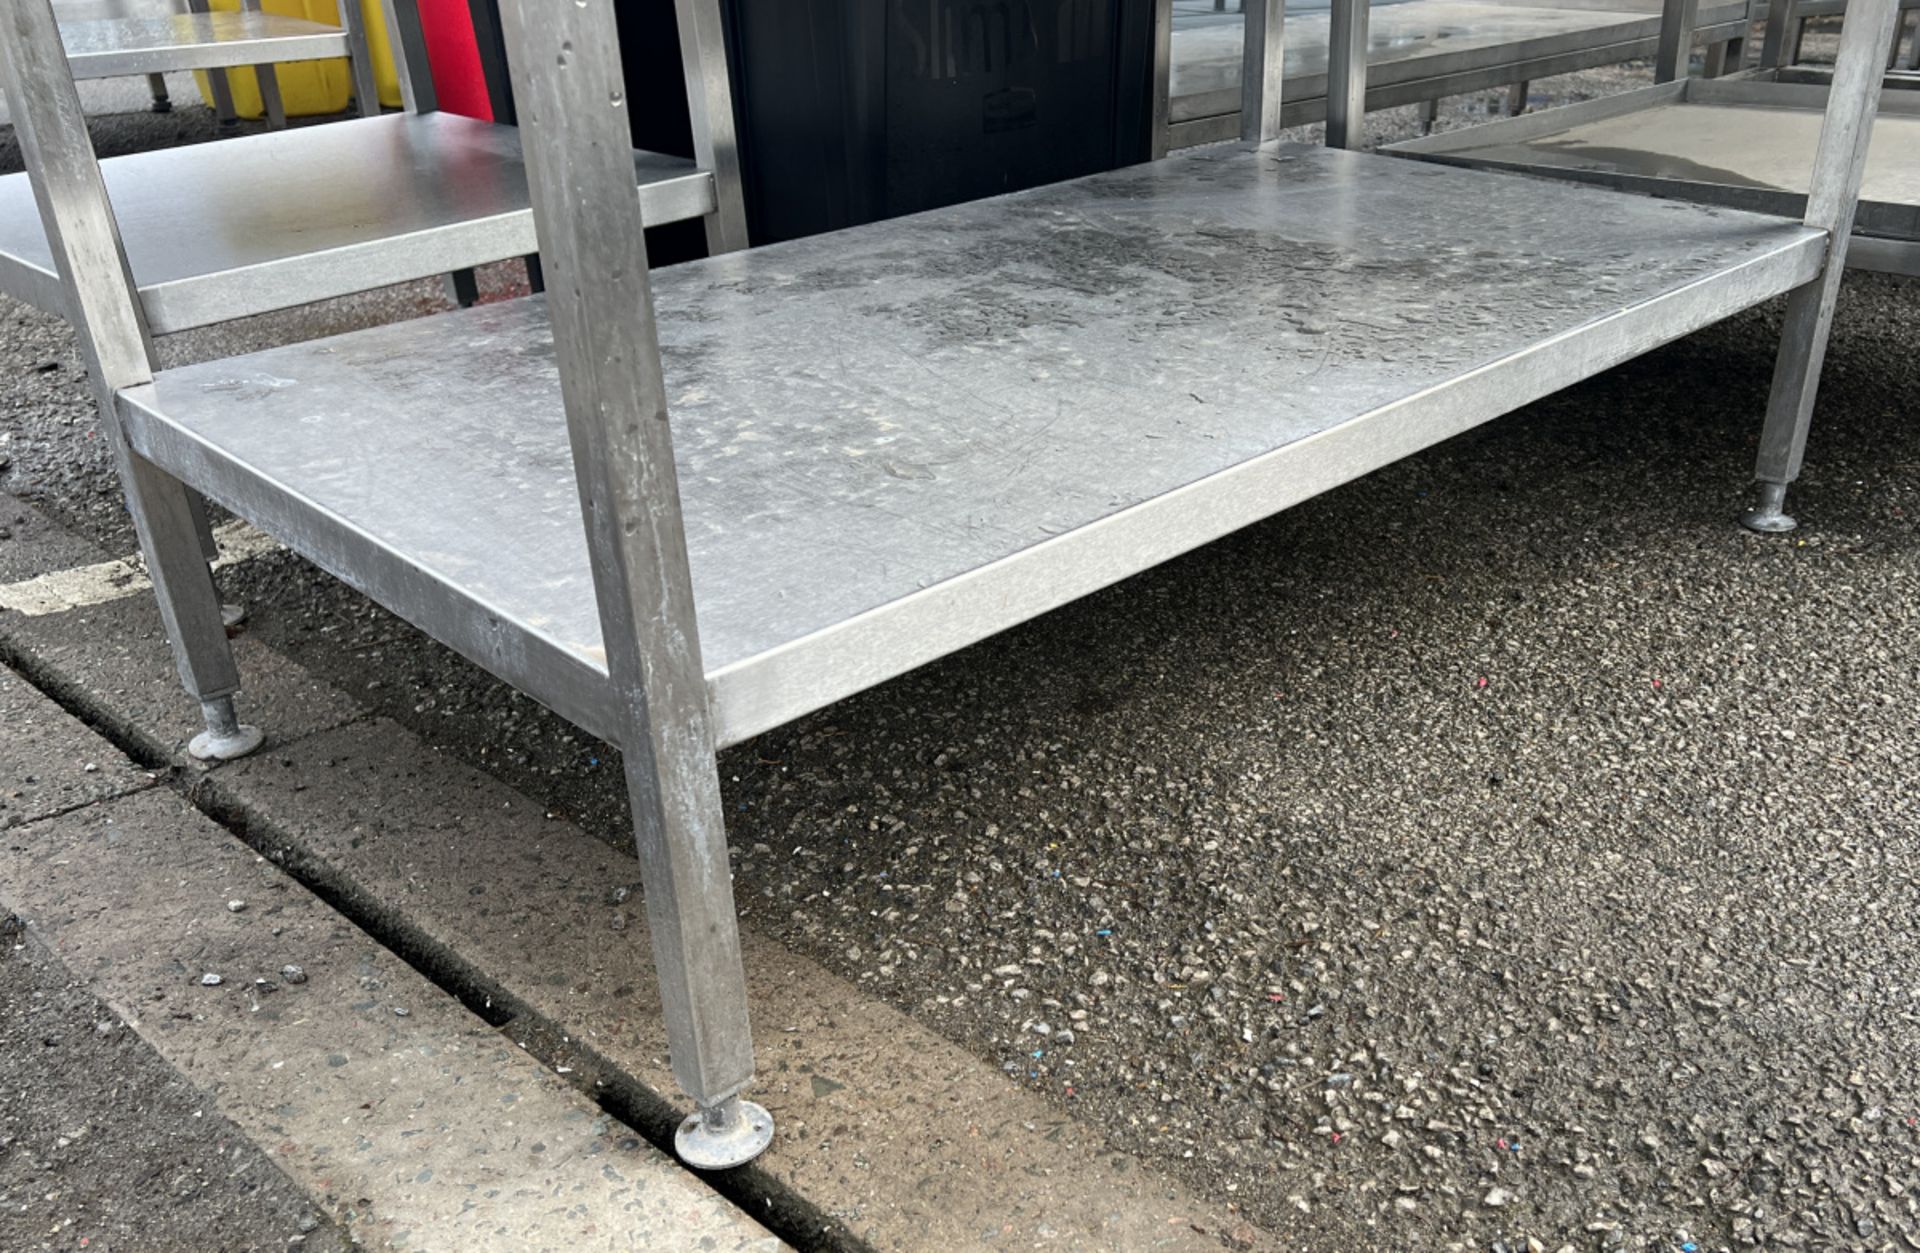 Stainless steel table with bottom shelf - dimensions: 130 x 70 x 90cm - Image 3 of 3